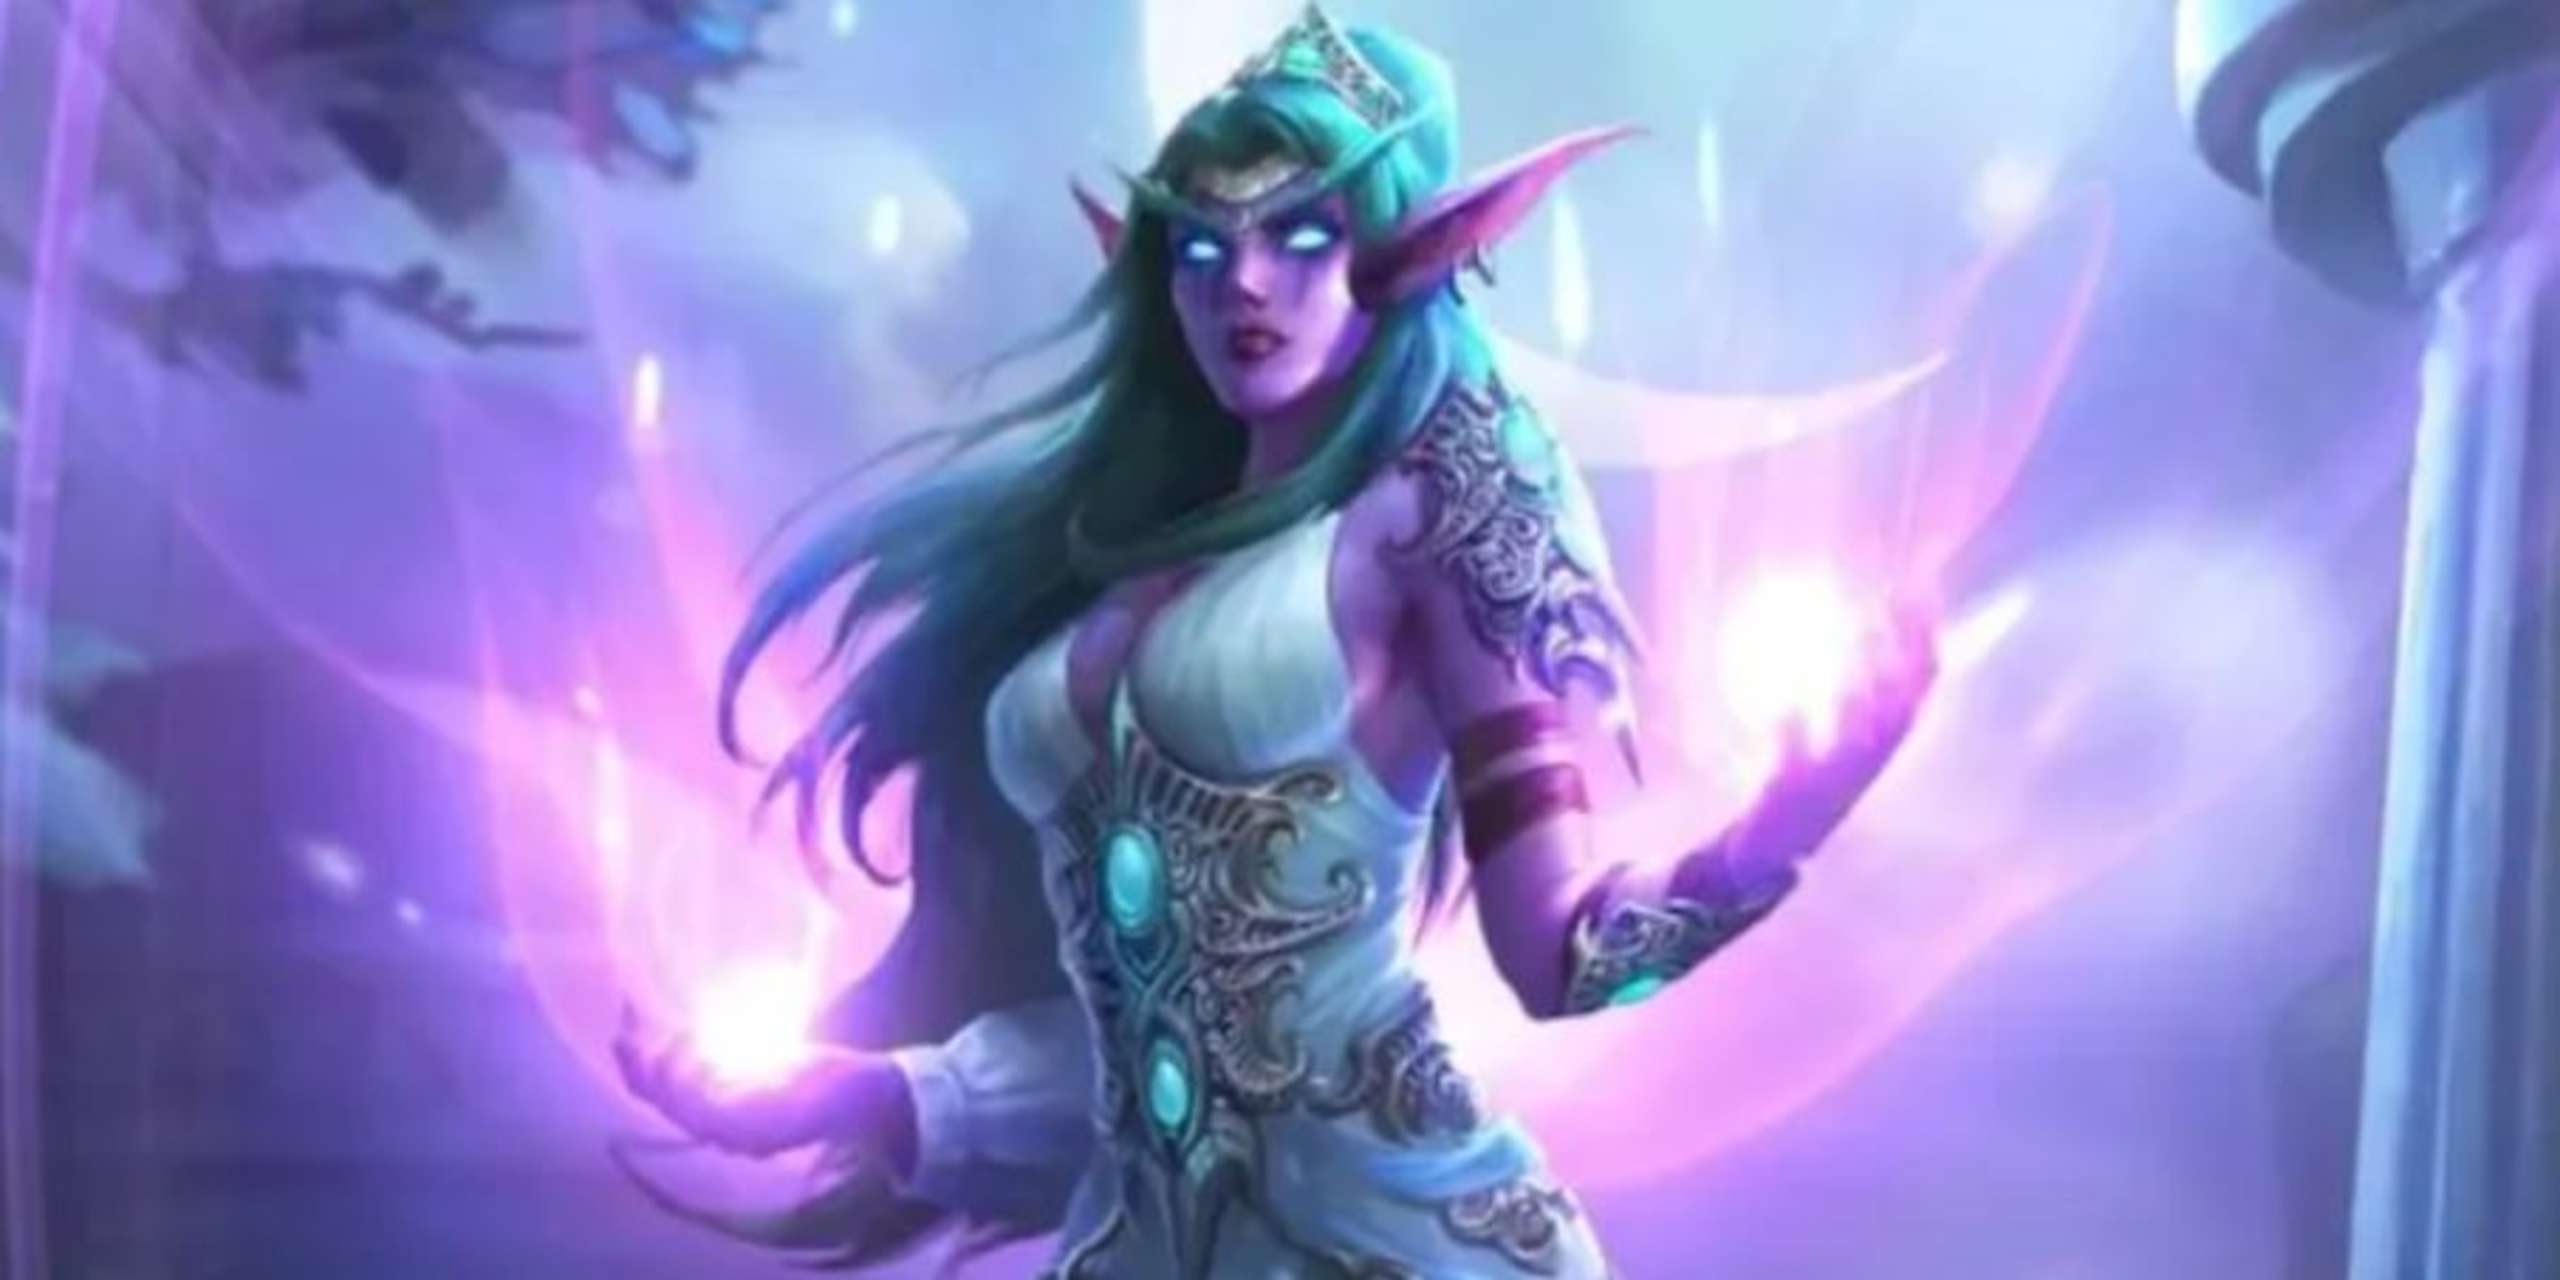 It’s A Lot Of Fun To Prepare Ready For The Release Of World Of Warcraft: Dragonflight By Crafting An Outstanding Tyrande Whisperwood Costume